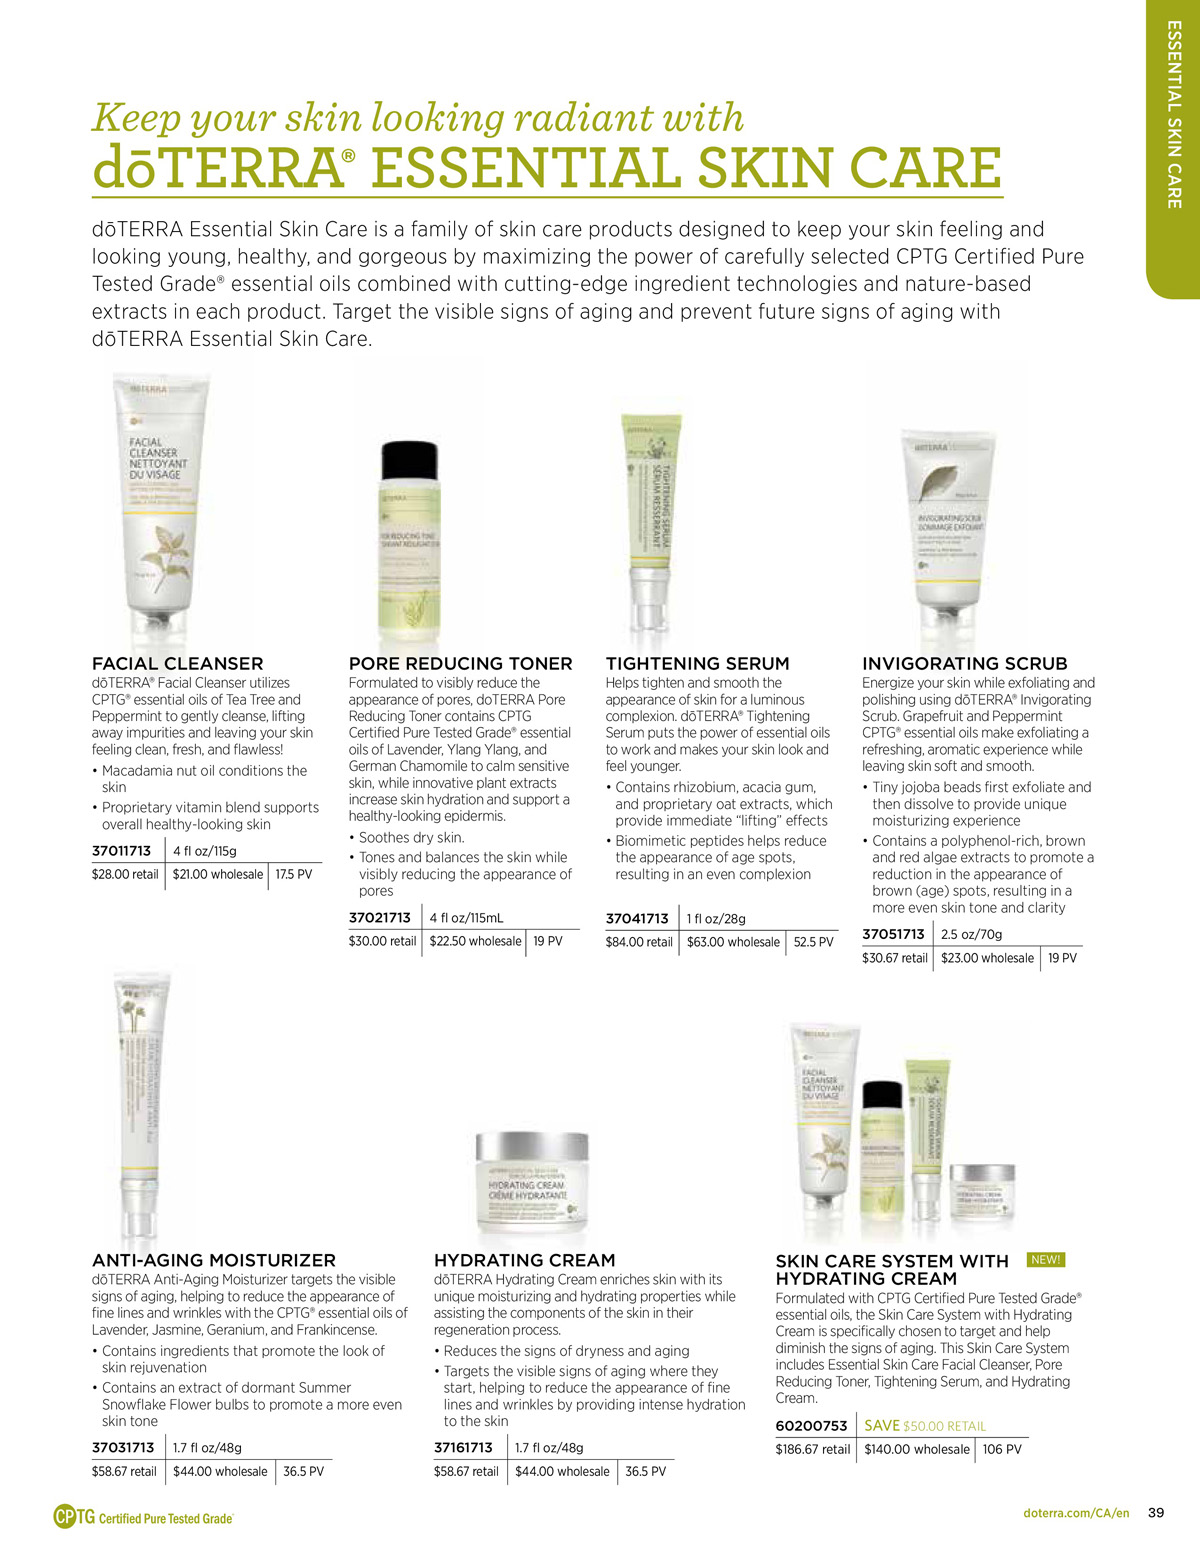 doterra product guide page 39